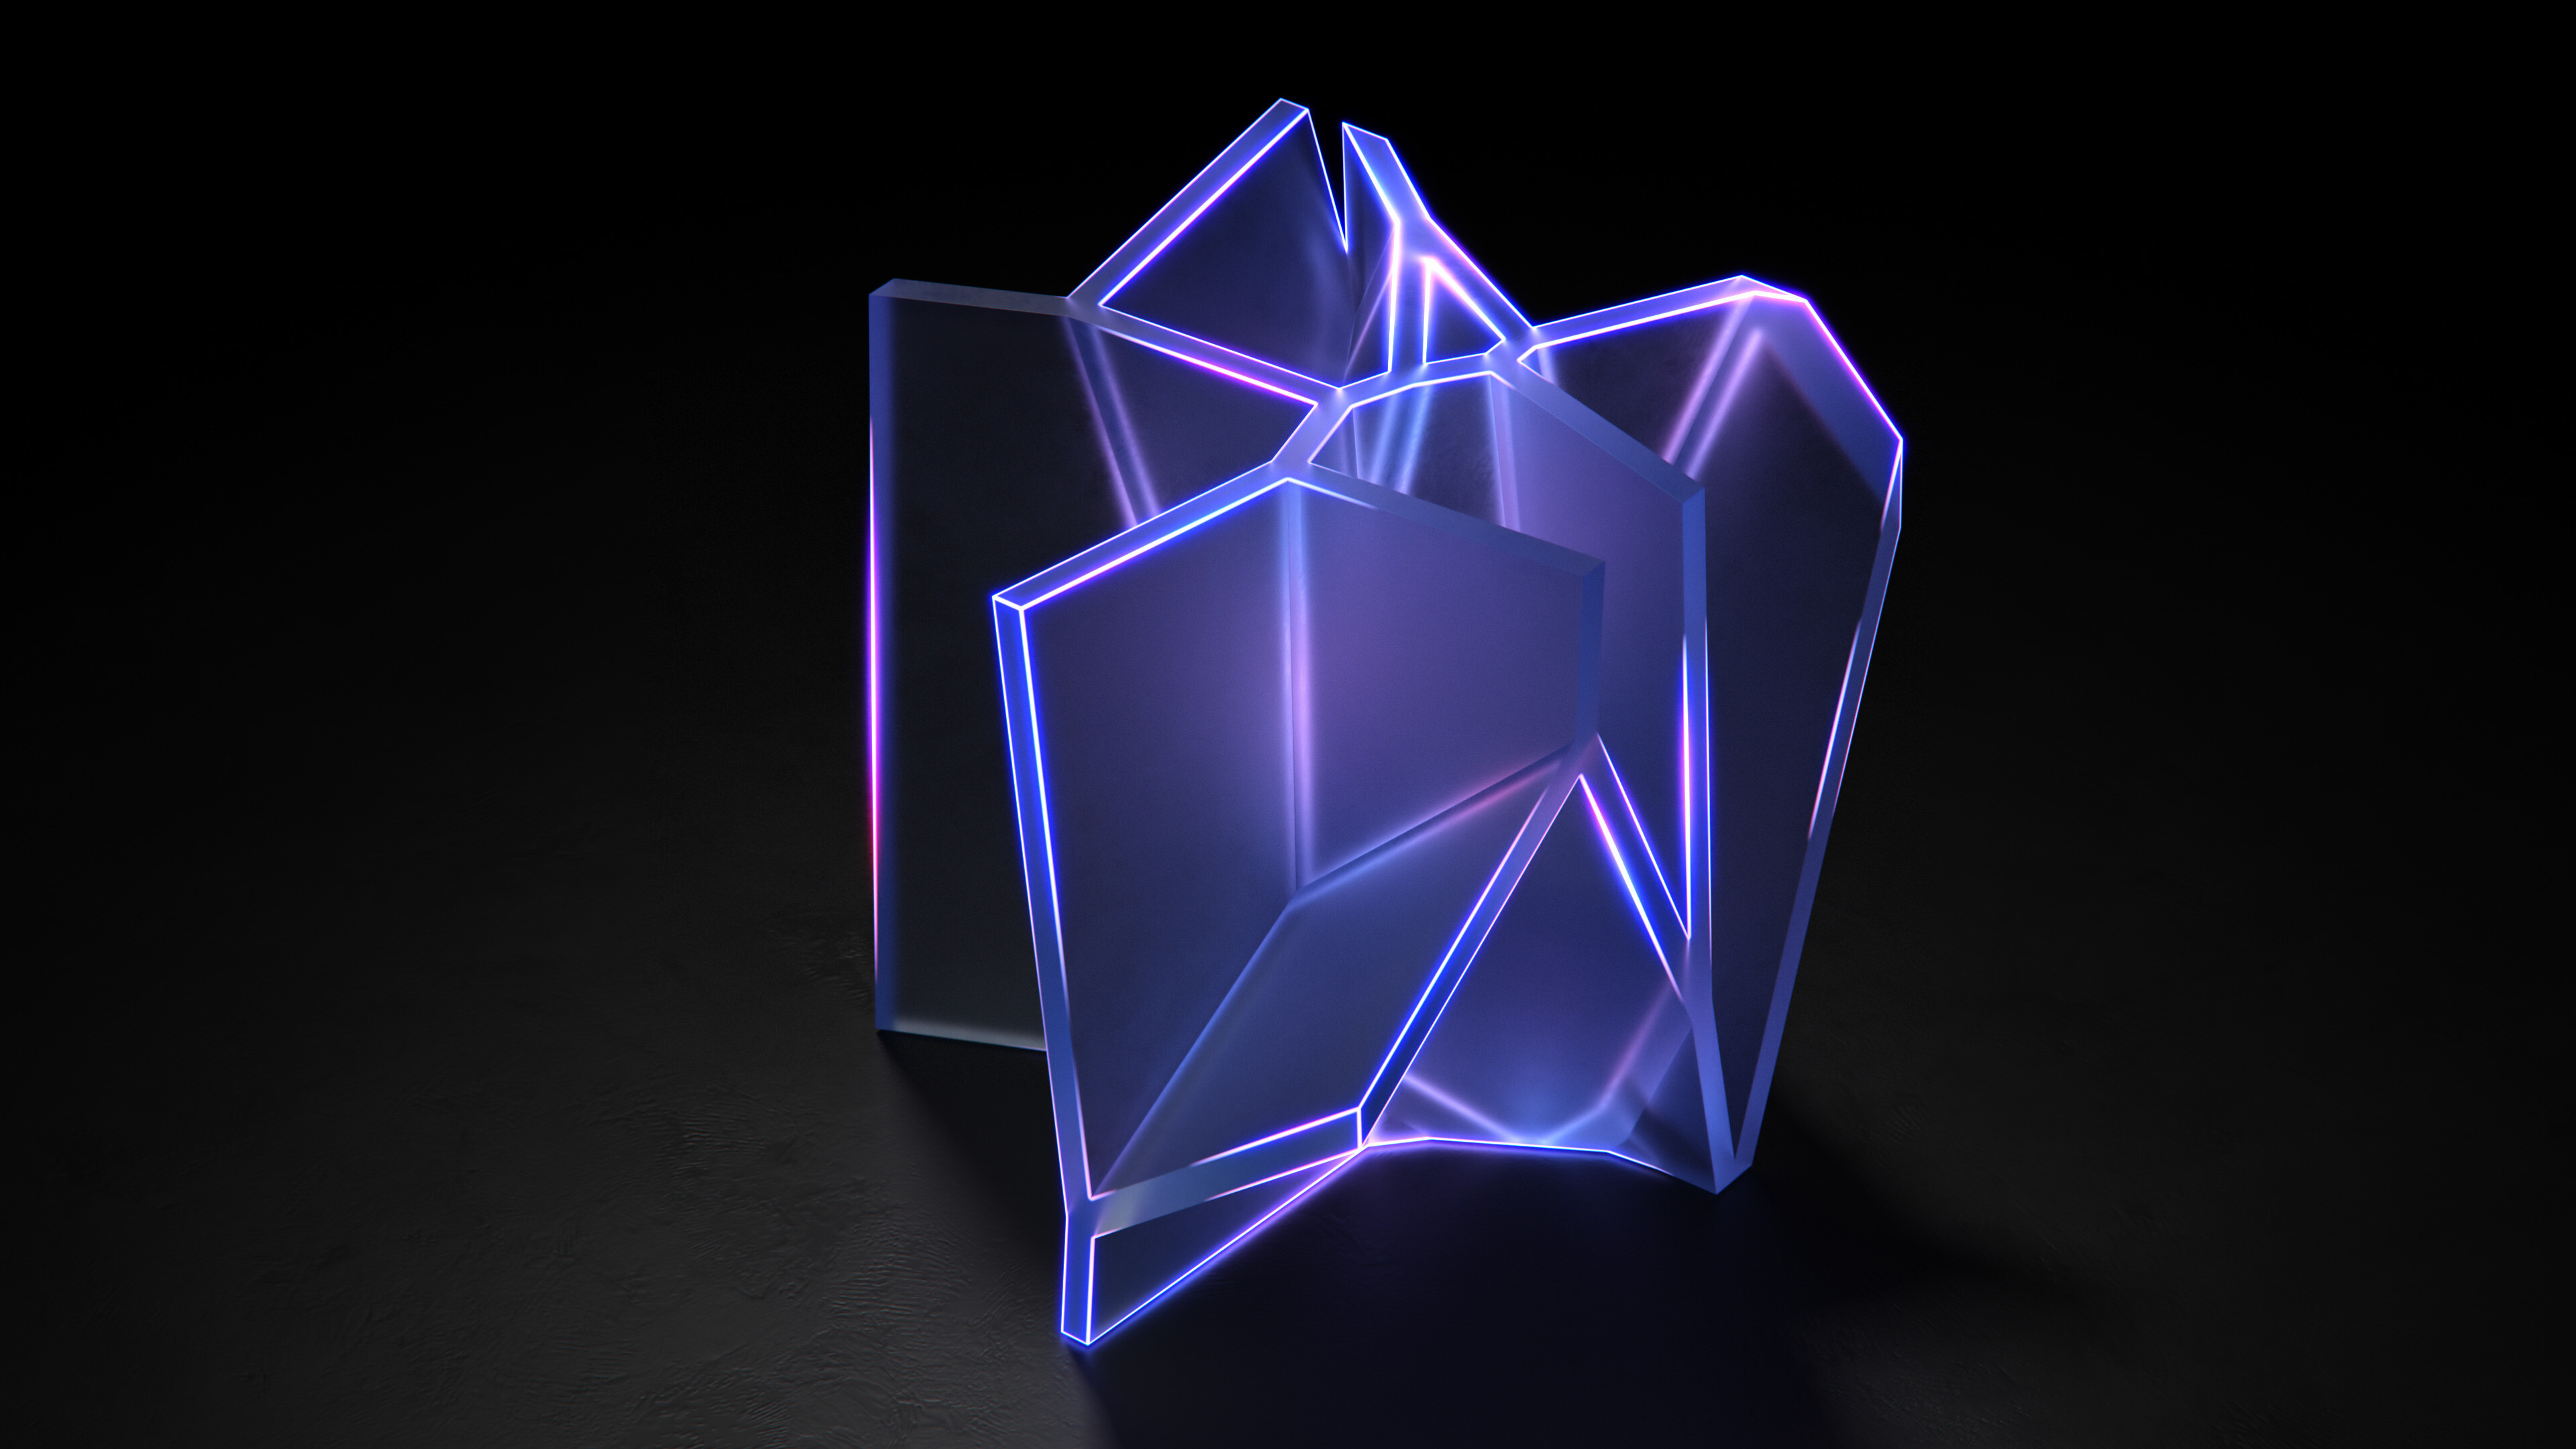 Geometric Abstract: Glowing glass, Three-dimensional shape, Complementary angles. 3840x2160 4K Wallpaper.